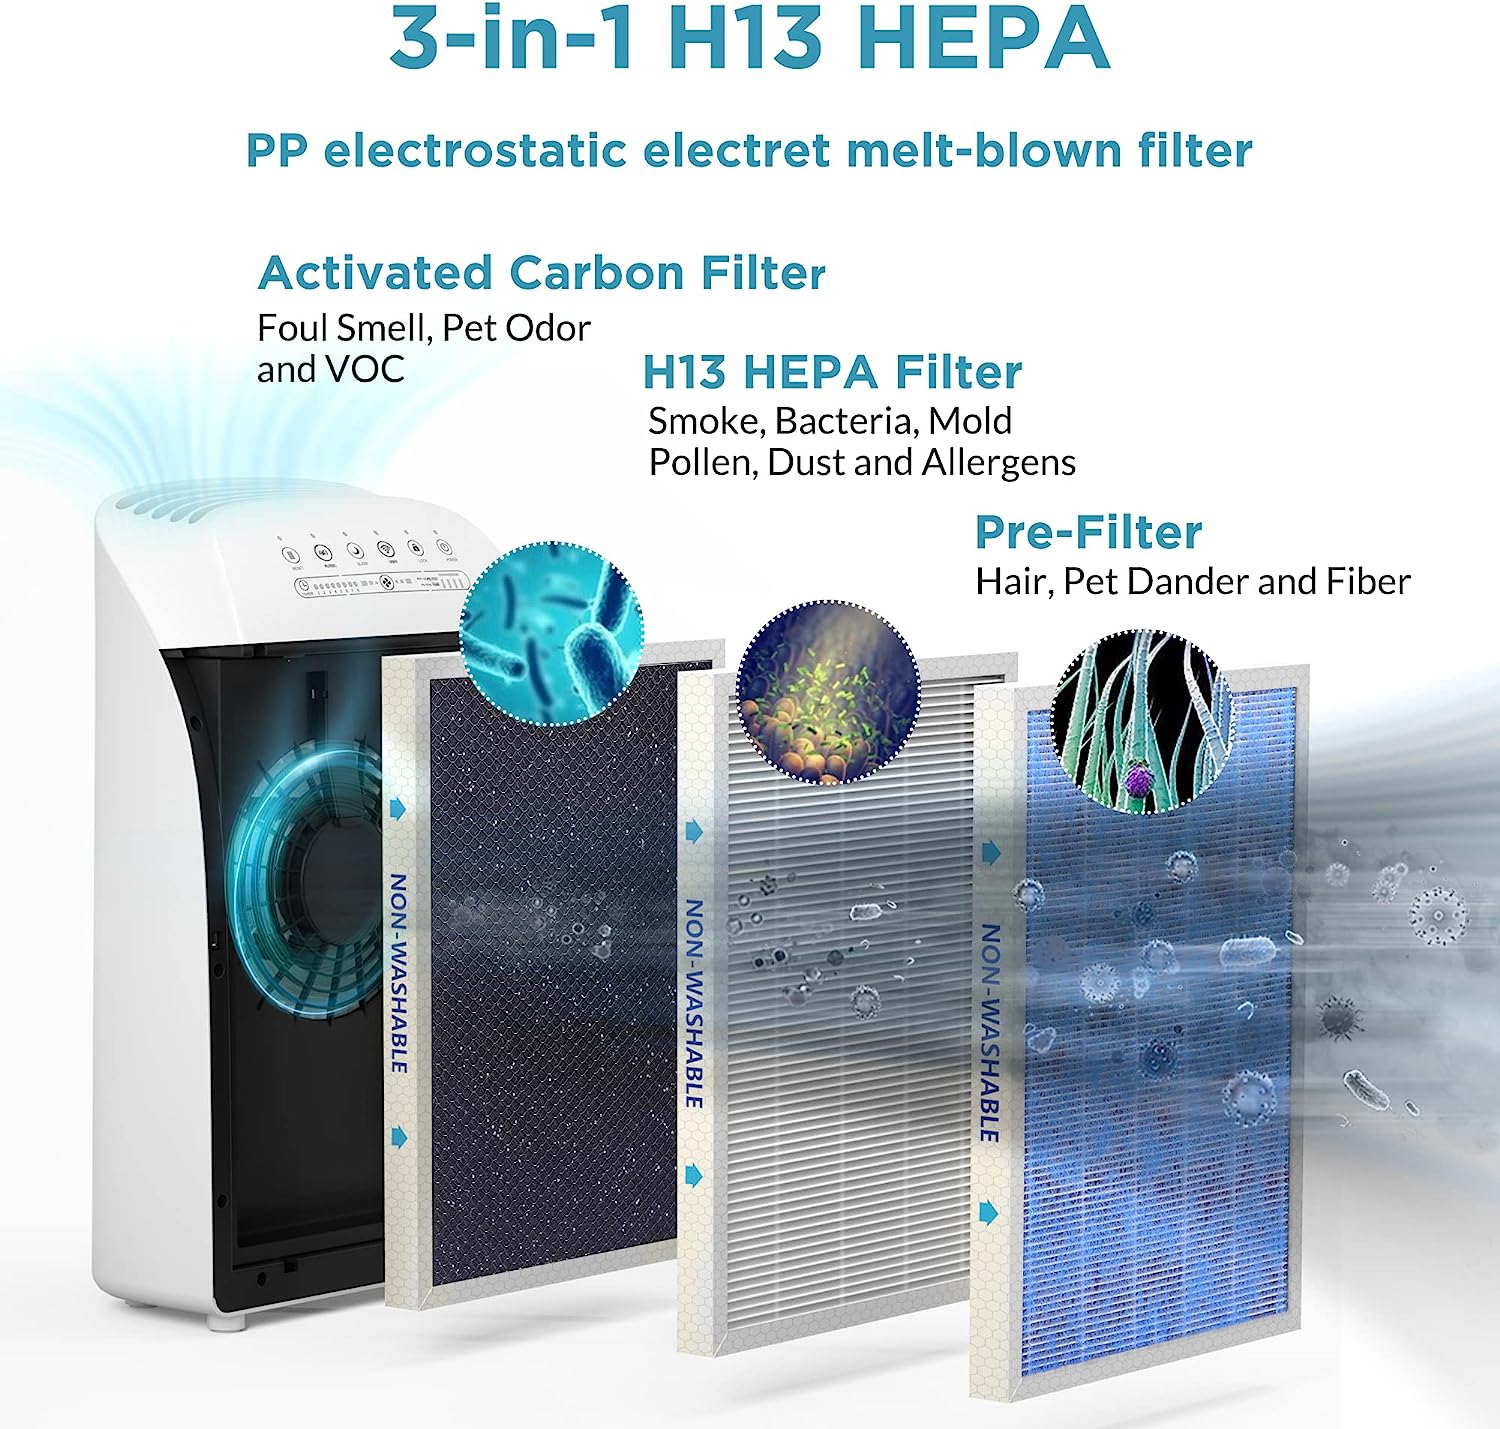 Genuine Membrane Solutions MSA3/MSA3S Original Air Purifier Filter Replacement, Upgraded 3-in-1 H13 True HEPA Filter with OdallerPure Technology, 2 Pack